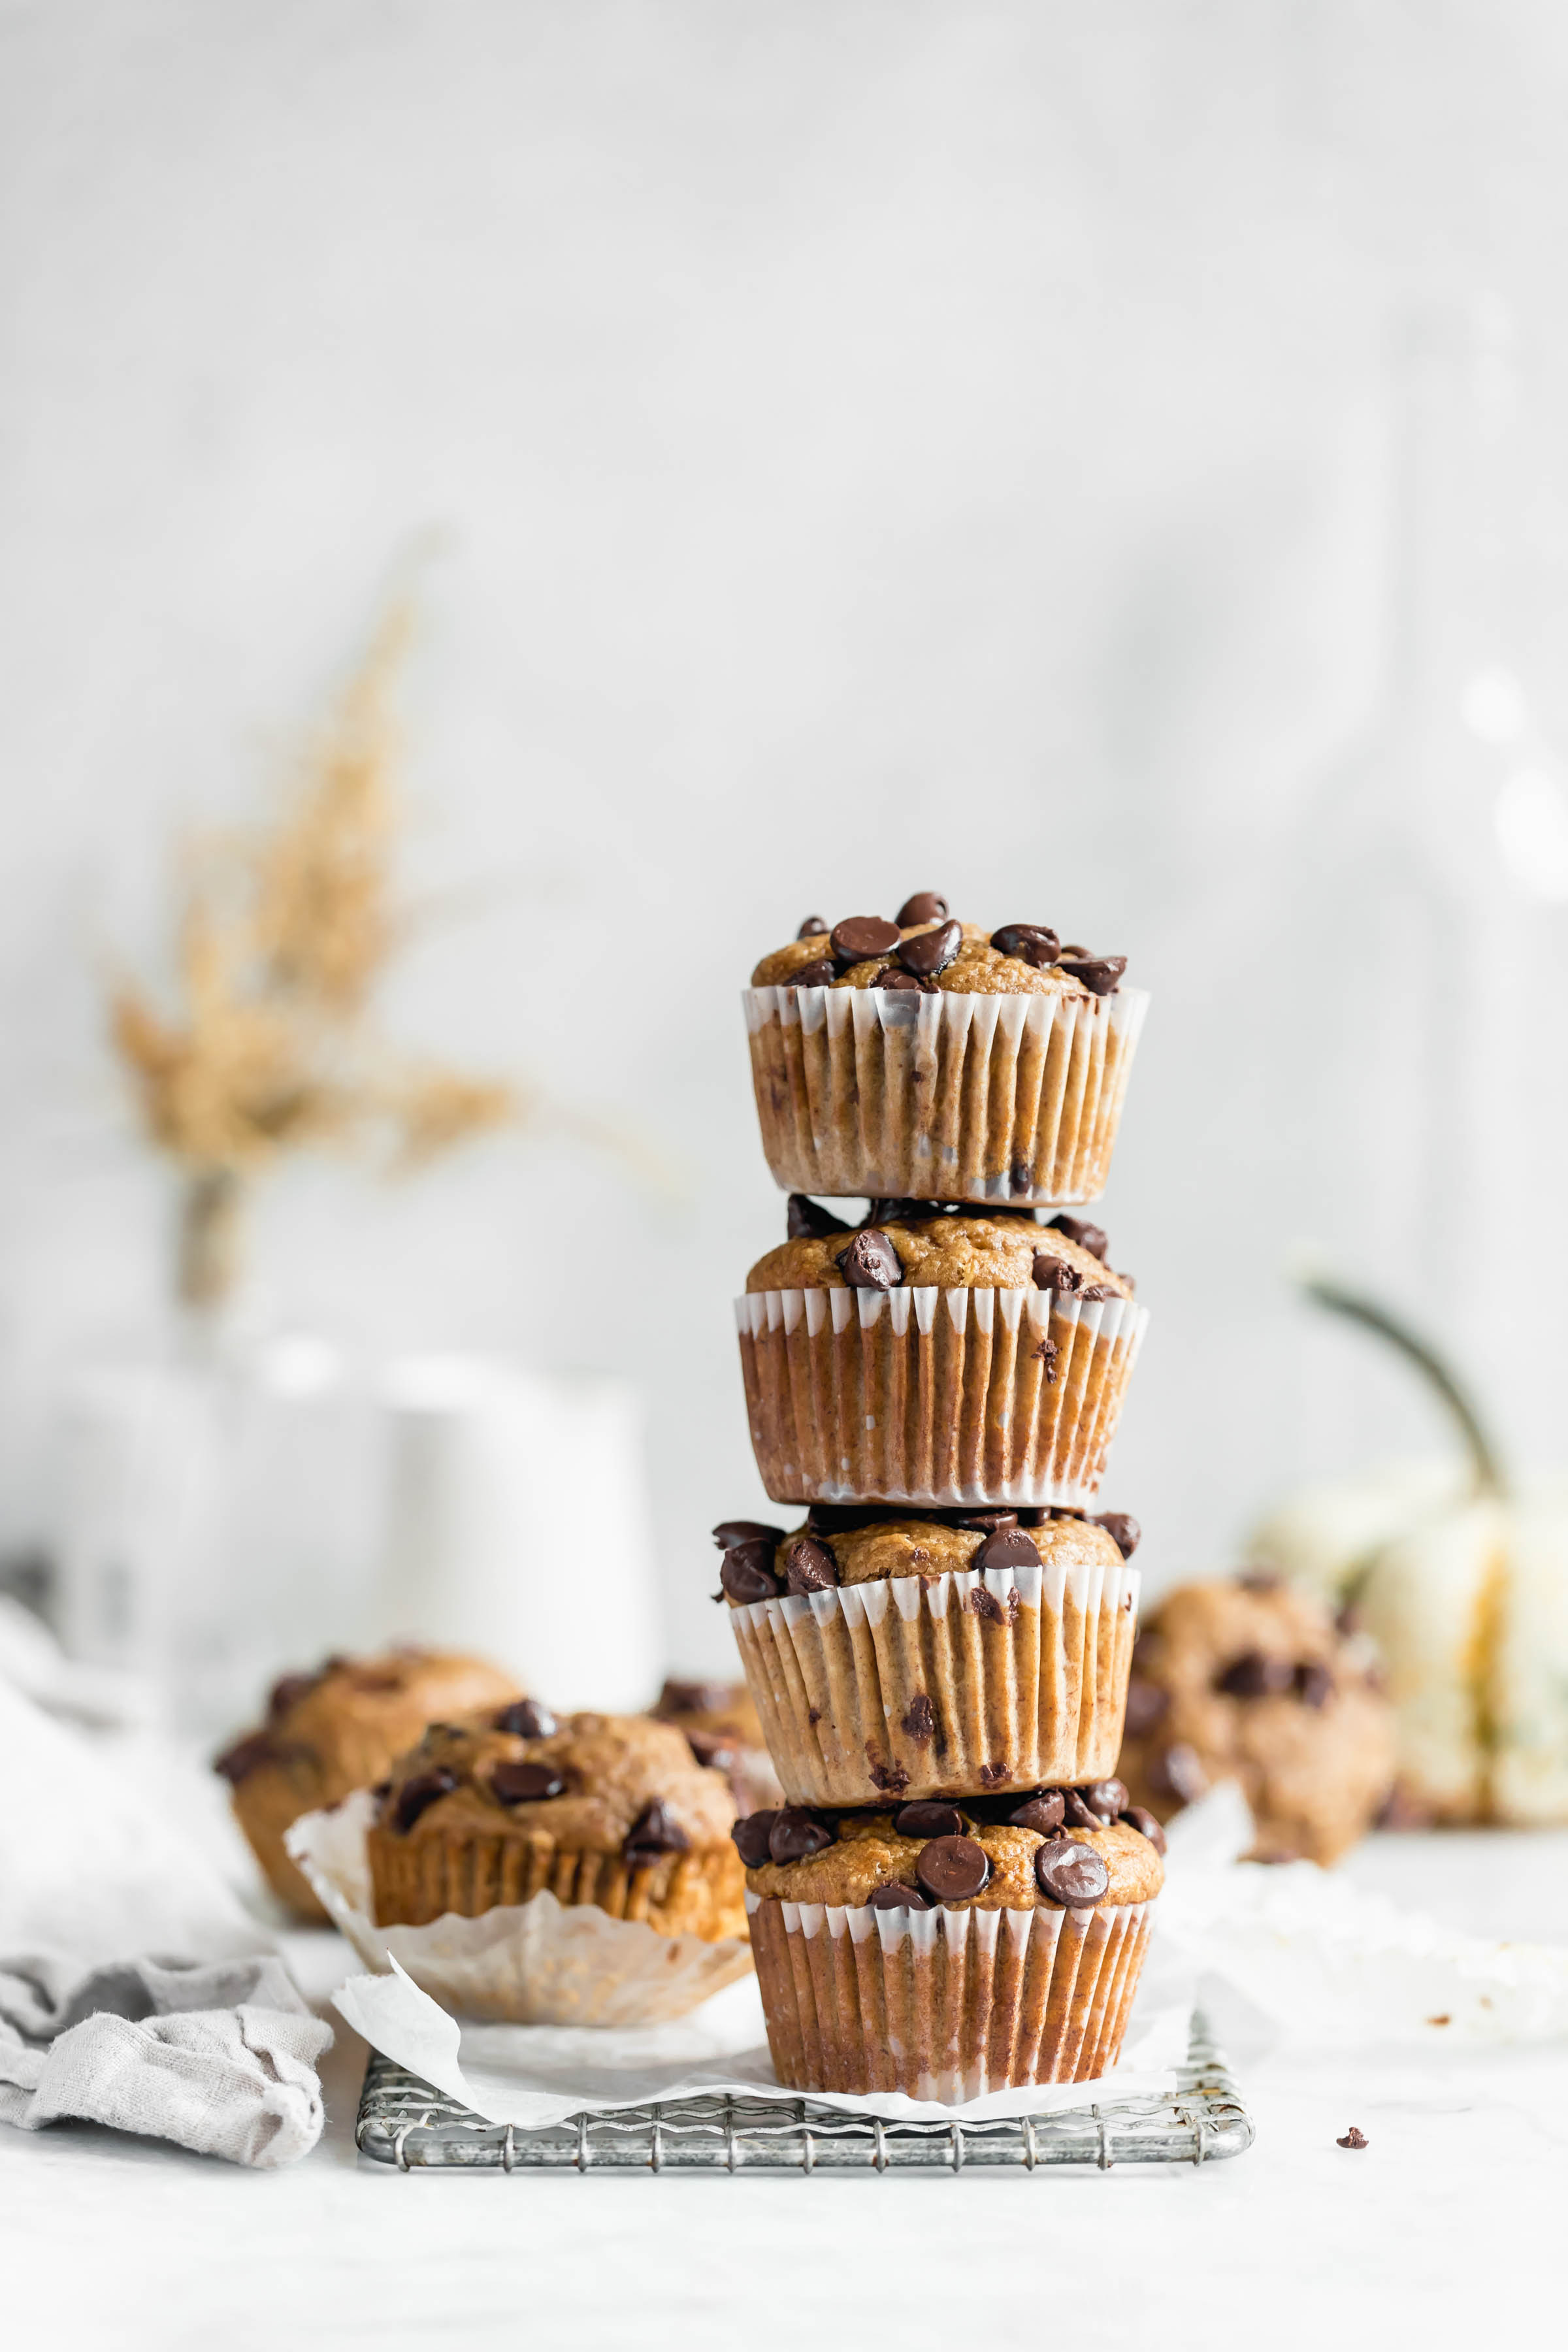 What do you need? This full stack of one bowl healthy peanut butter banana muffins!